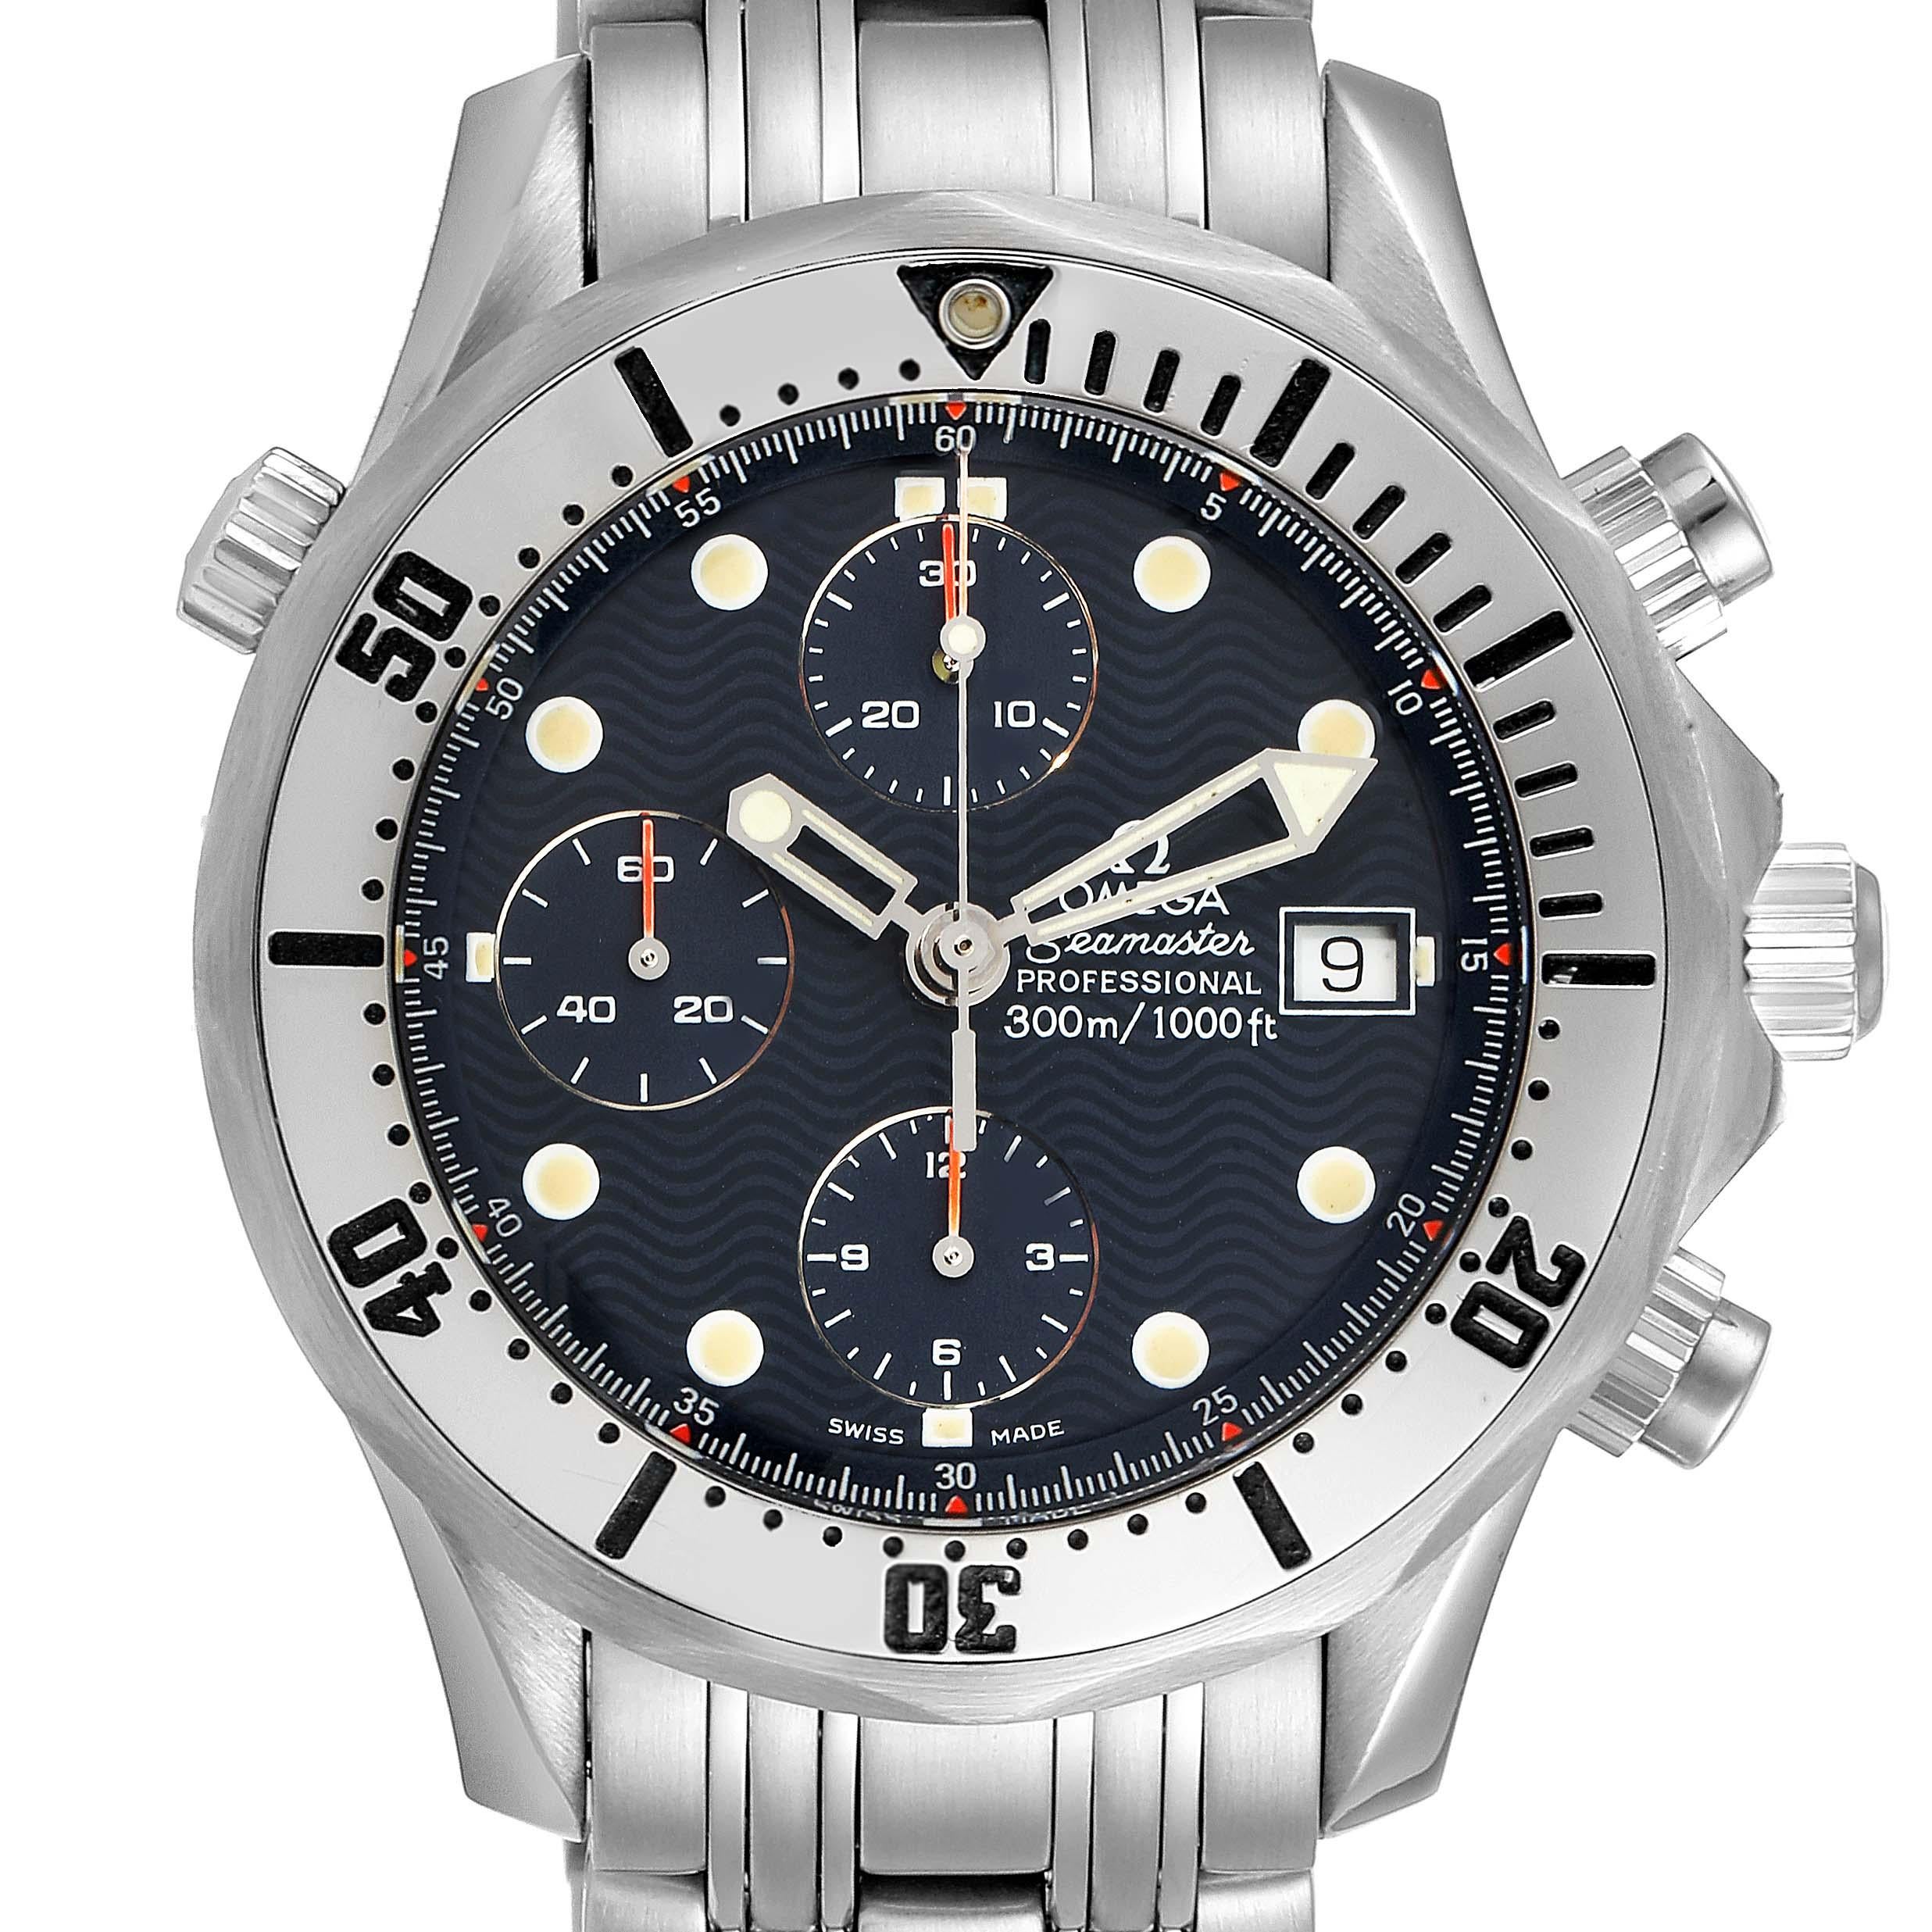 Omega Seamaster Chronograph Blue Dial Steel Mens Watch 2598.80.00. Officially certified chronometer automatic self-winding movement. Chronograph function. Brushed and polished stainless steel case 41.5 mm in diameter. Omega logo on a crown.